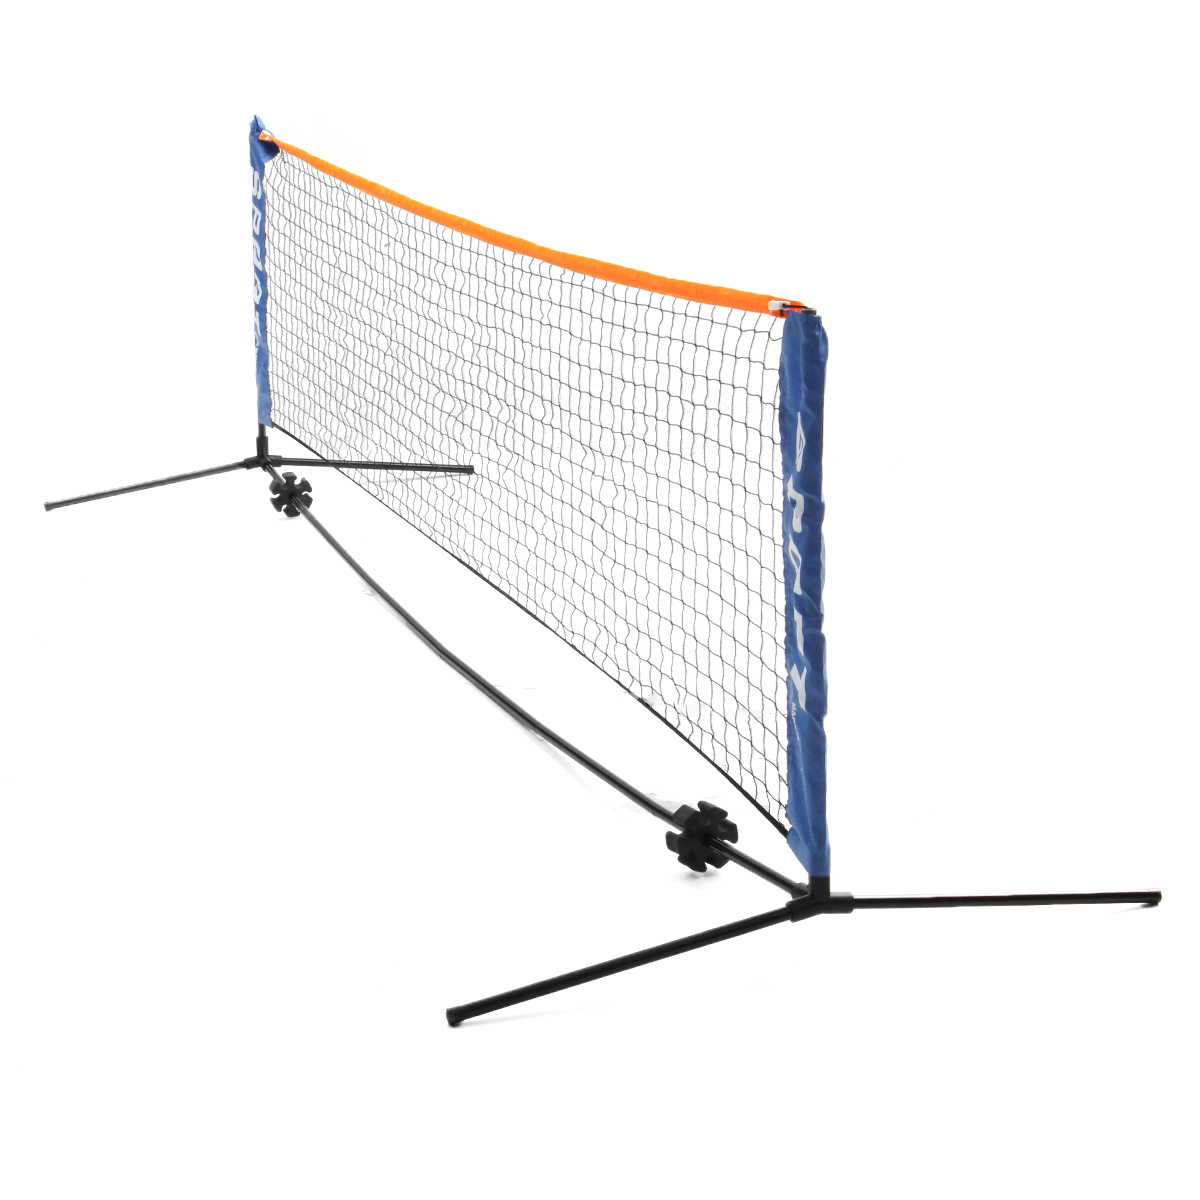 3x085M-Tennis-Net-Standard-Steel-Cable-Badminton-Volleyball-Training-Net-Team-Sport-Net-Frame-with-S-1723822-4